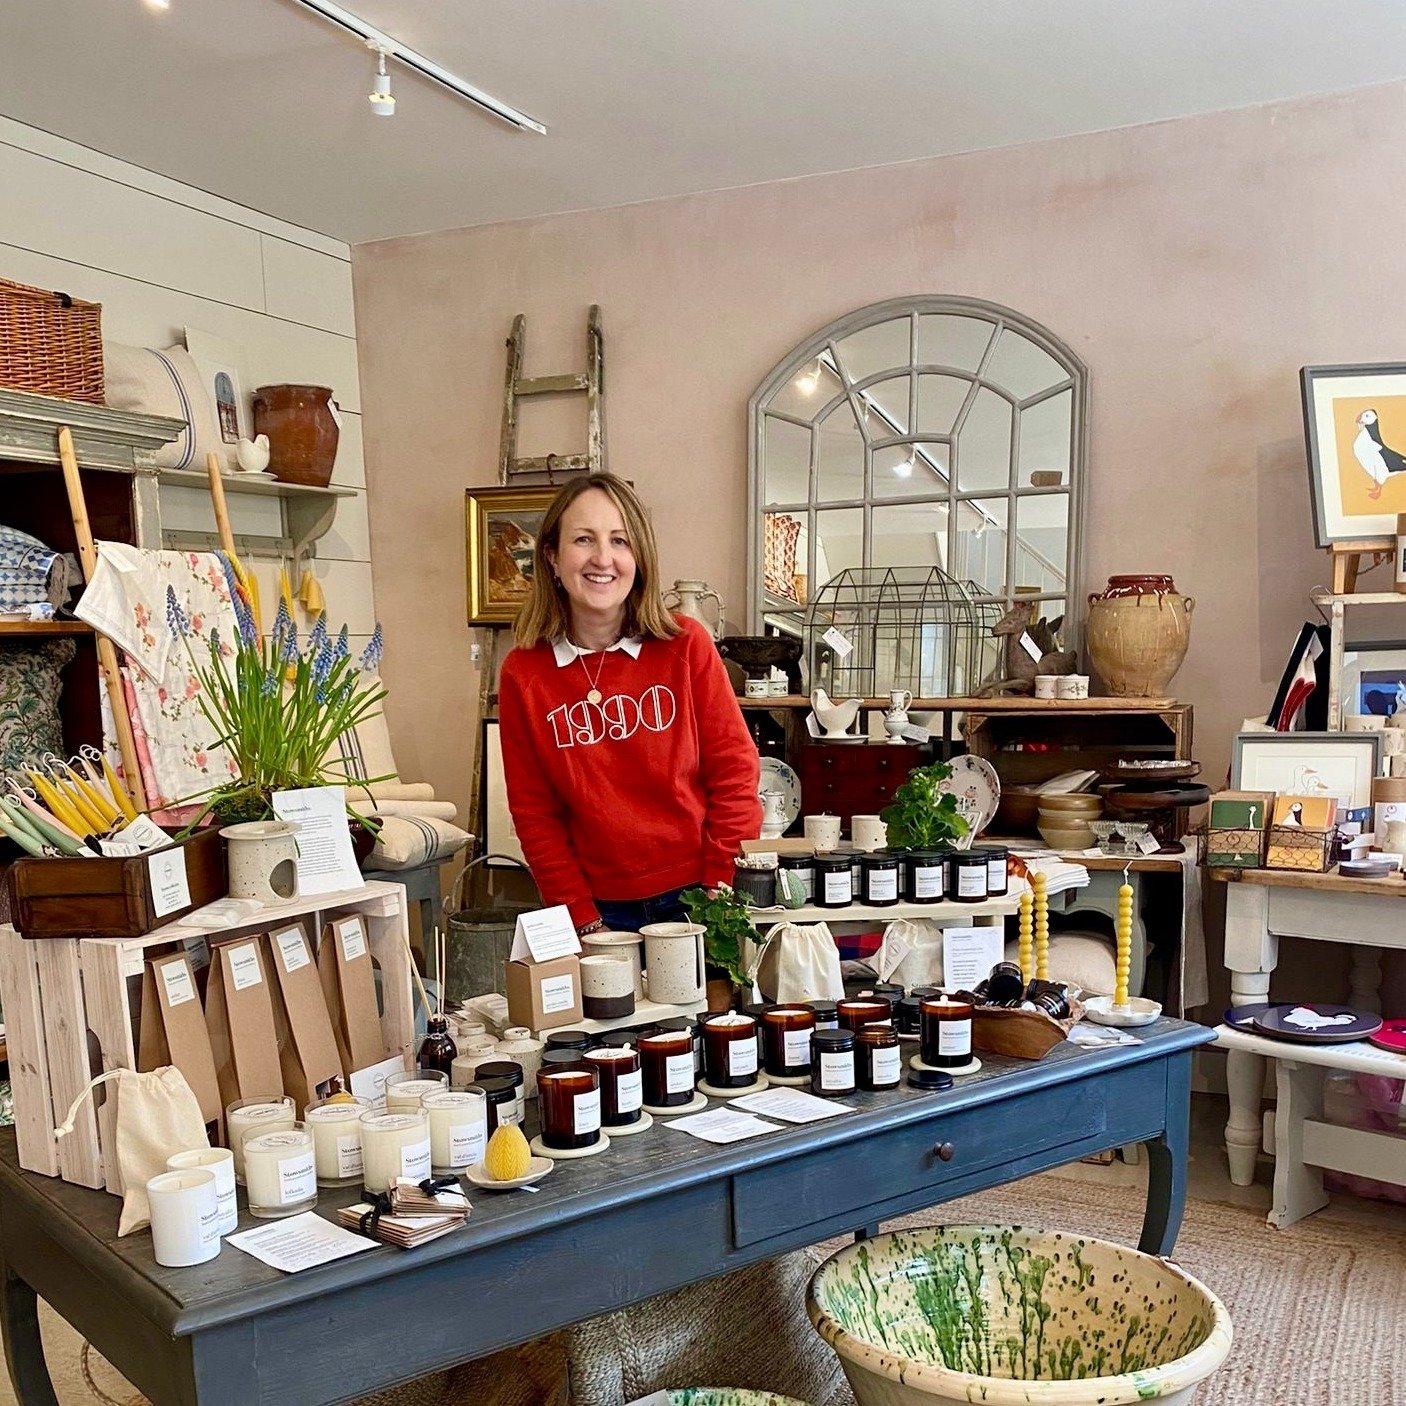 Good Morning, 

Meet maker Katie Smith aka @Stowsmiths who is manning the shop today. &hearts;️

Stowsmiths create 100% soy wax and beeswax candles  in varying shapes and sizes, wax melts and delicious botanical scented diffusers. All with strong eco